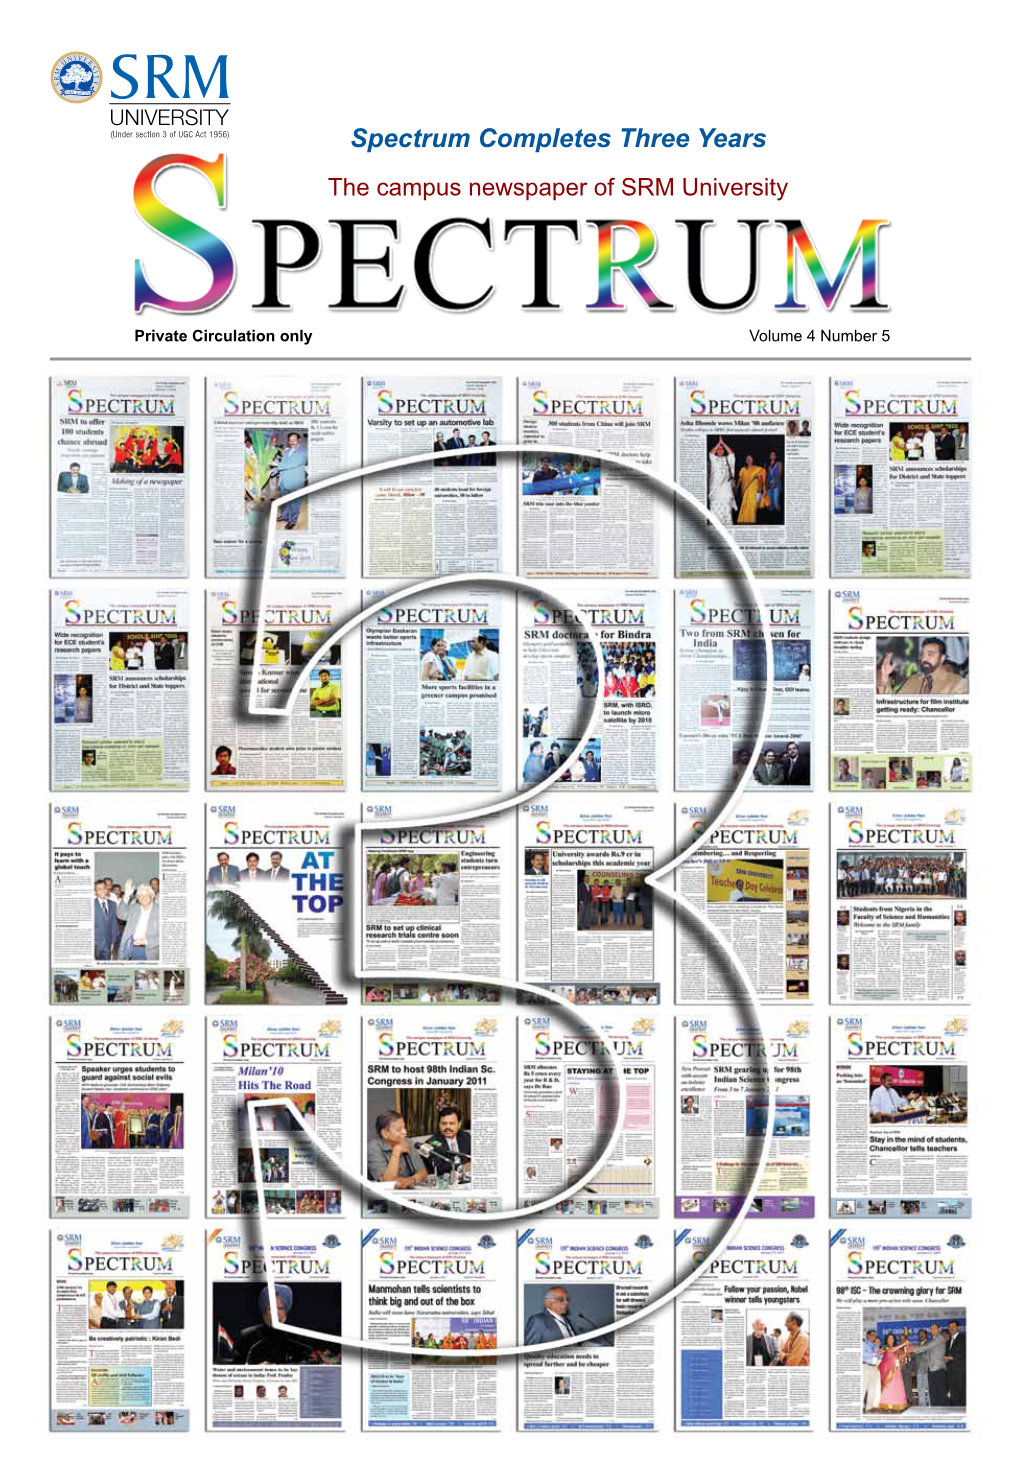 Spectrum Completes Three Years the Campus Newspaper of SRM University